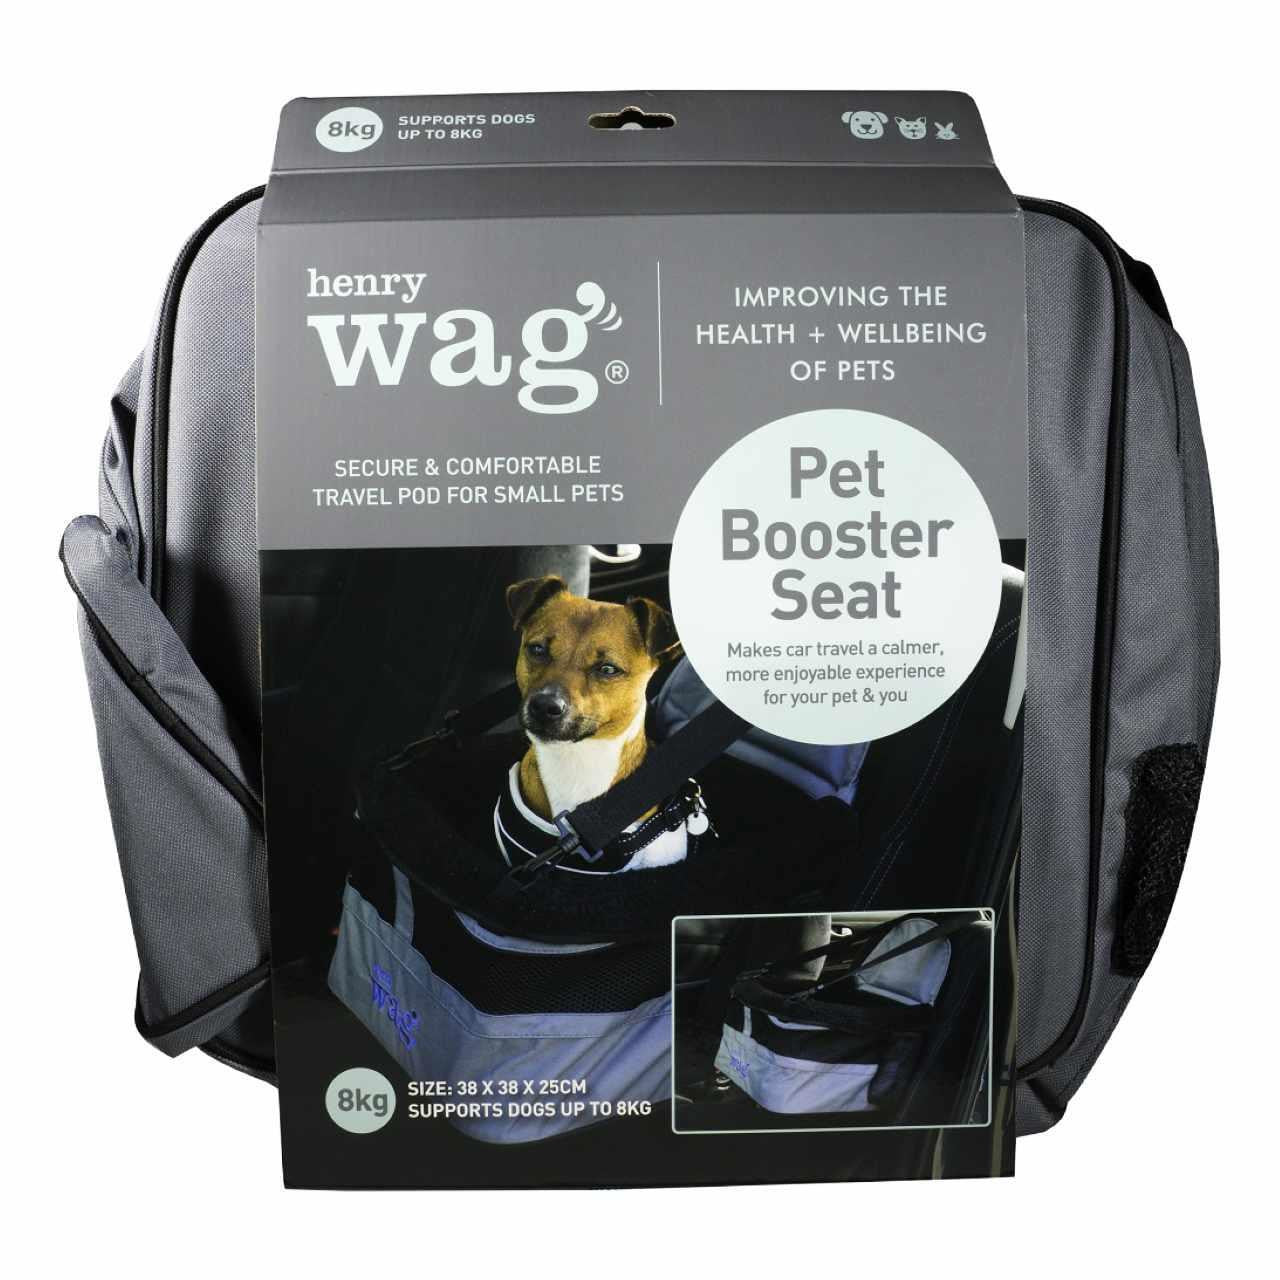 Henry Wag Pet Booster Seat packaging